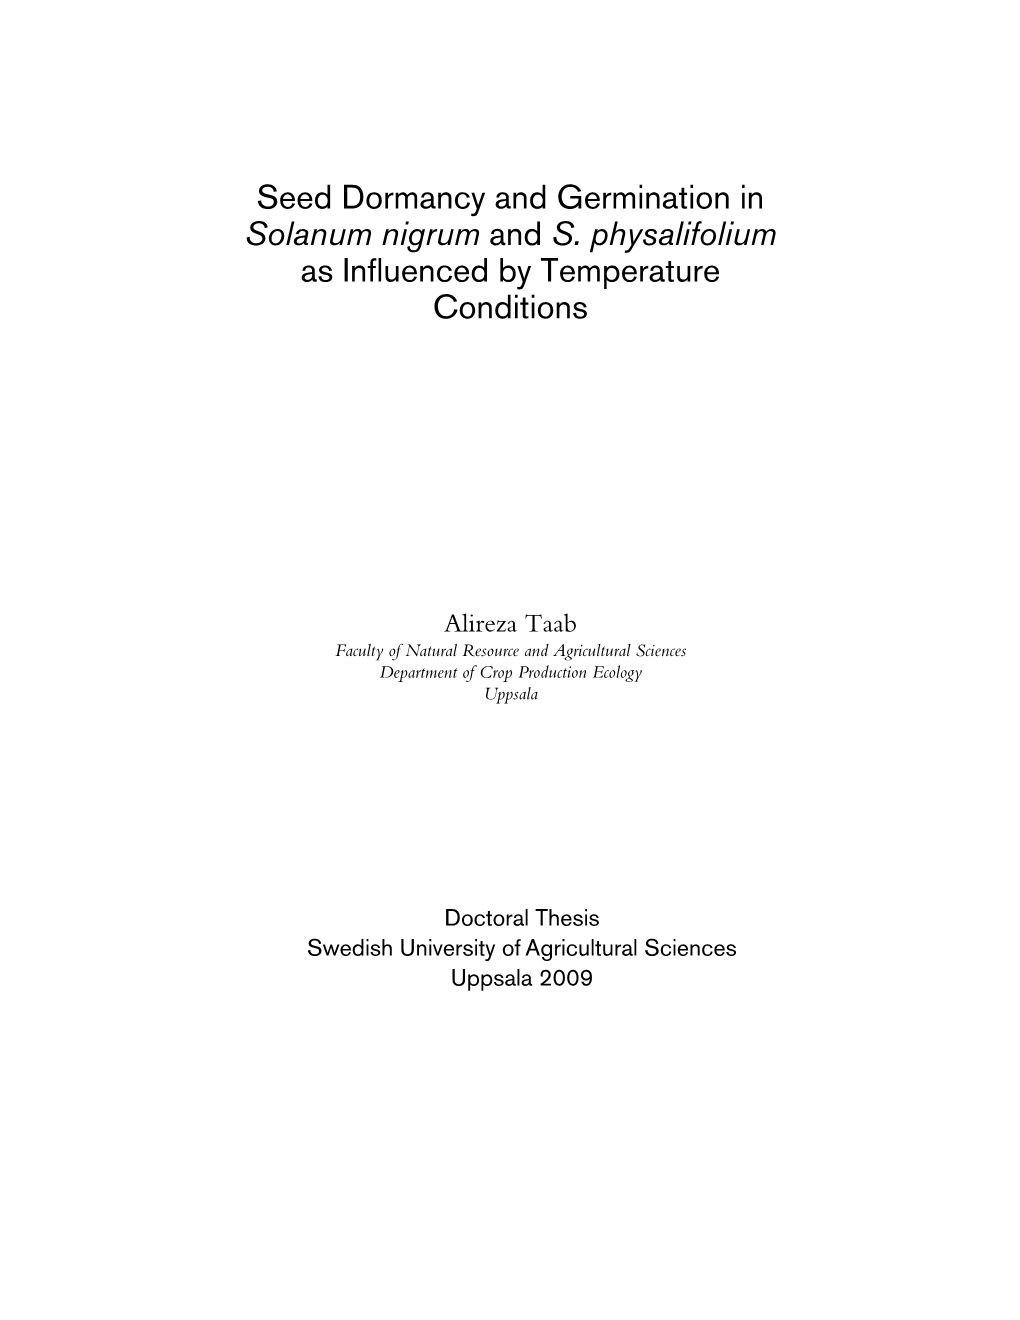 Seed Dormancy and Germination in Solanum Nigrum and S